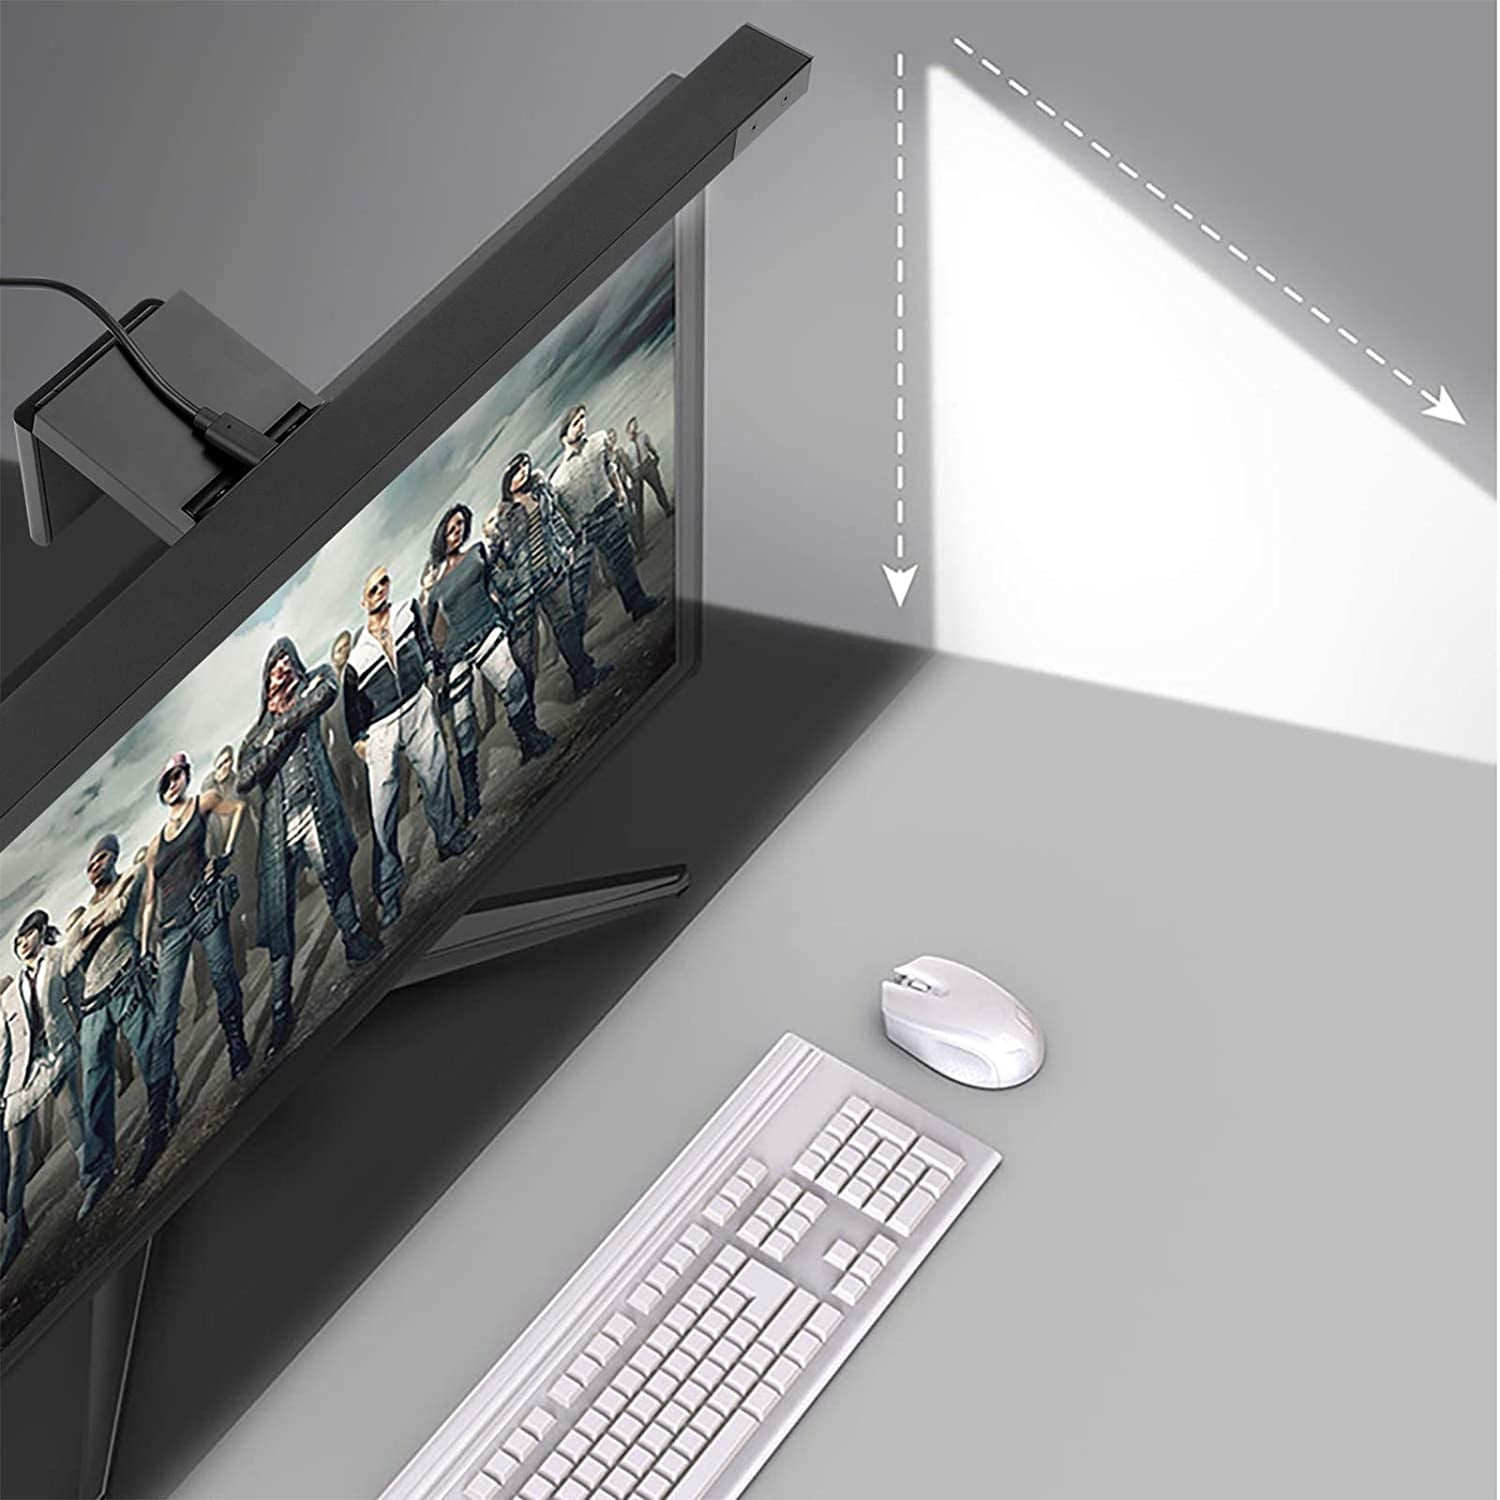 SHUXAG LED Reading Desk Lamp with No Glare Screen Light Bar Gaming Light with Touch Sensor for Home /Office Computer Monitor Light 3 Color Modes & USB Powered & Adjustable Brightness 